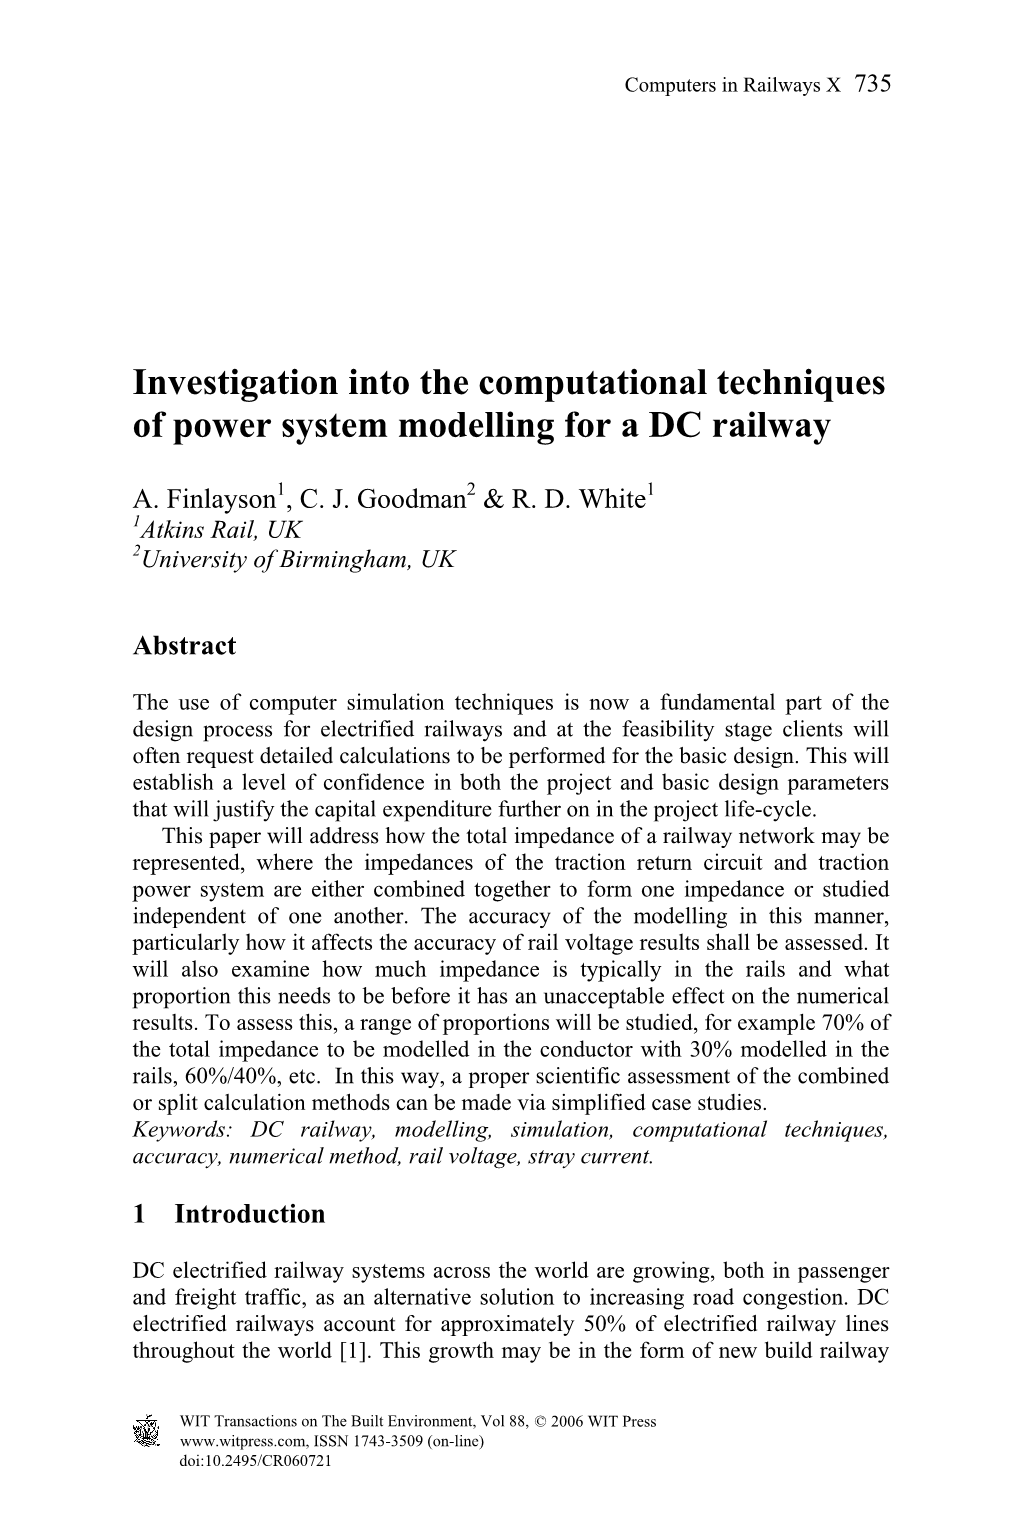 Investigation Into the Computational Techniques of Power System Modelling for a DC Railway